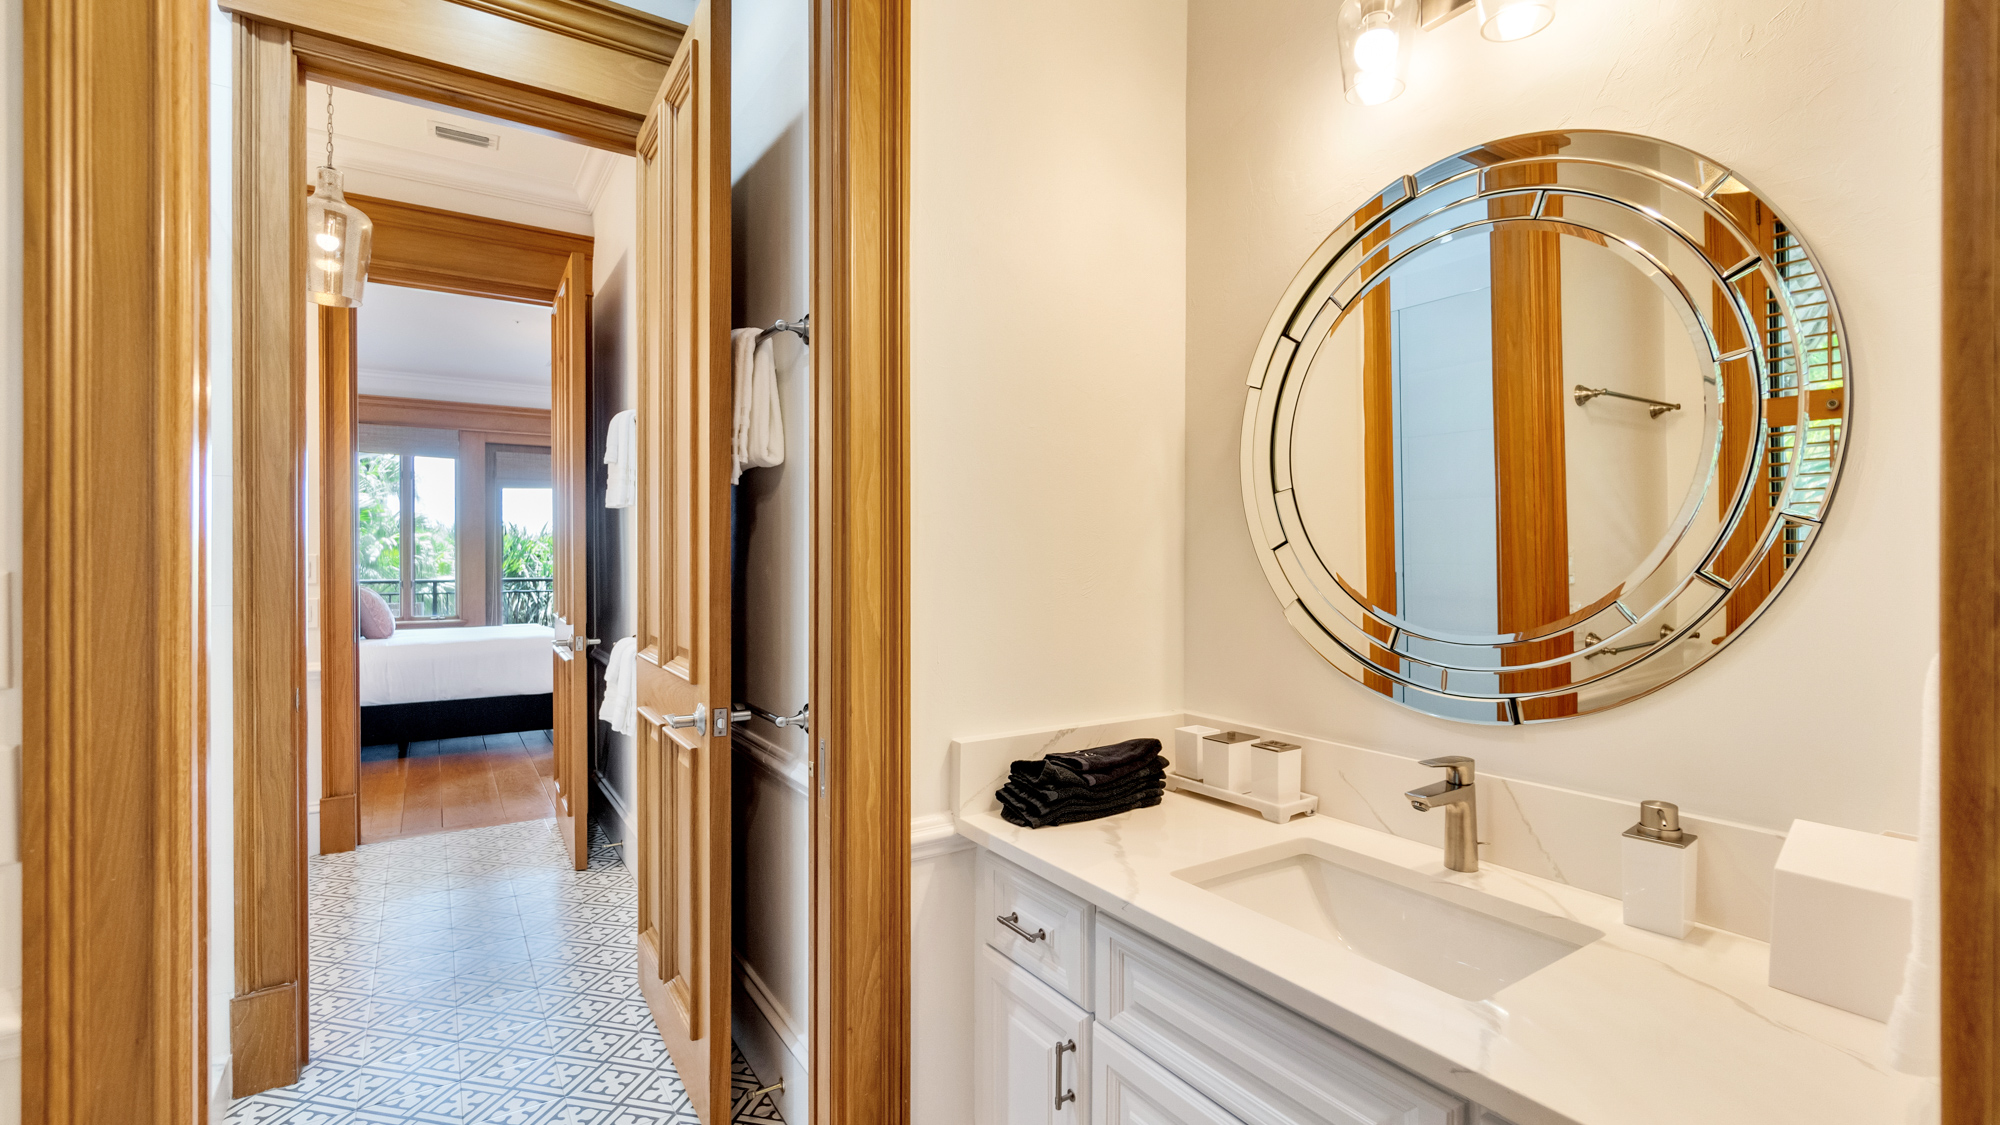 Bathroom with white fixtures and large circle mirror adjacent to bedroom at the Sea Palms Estate in Captiva Island, FL